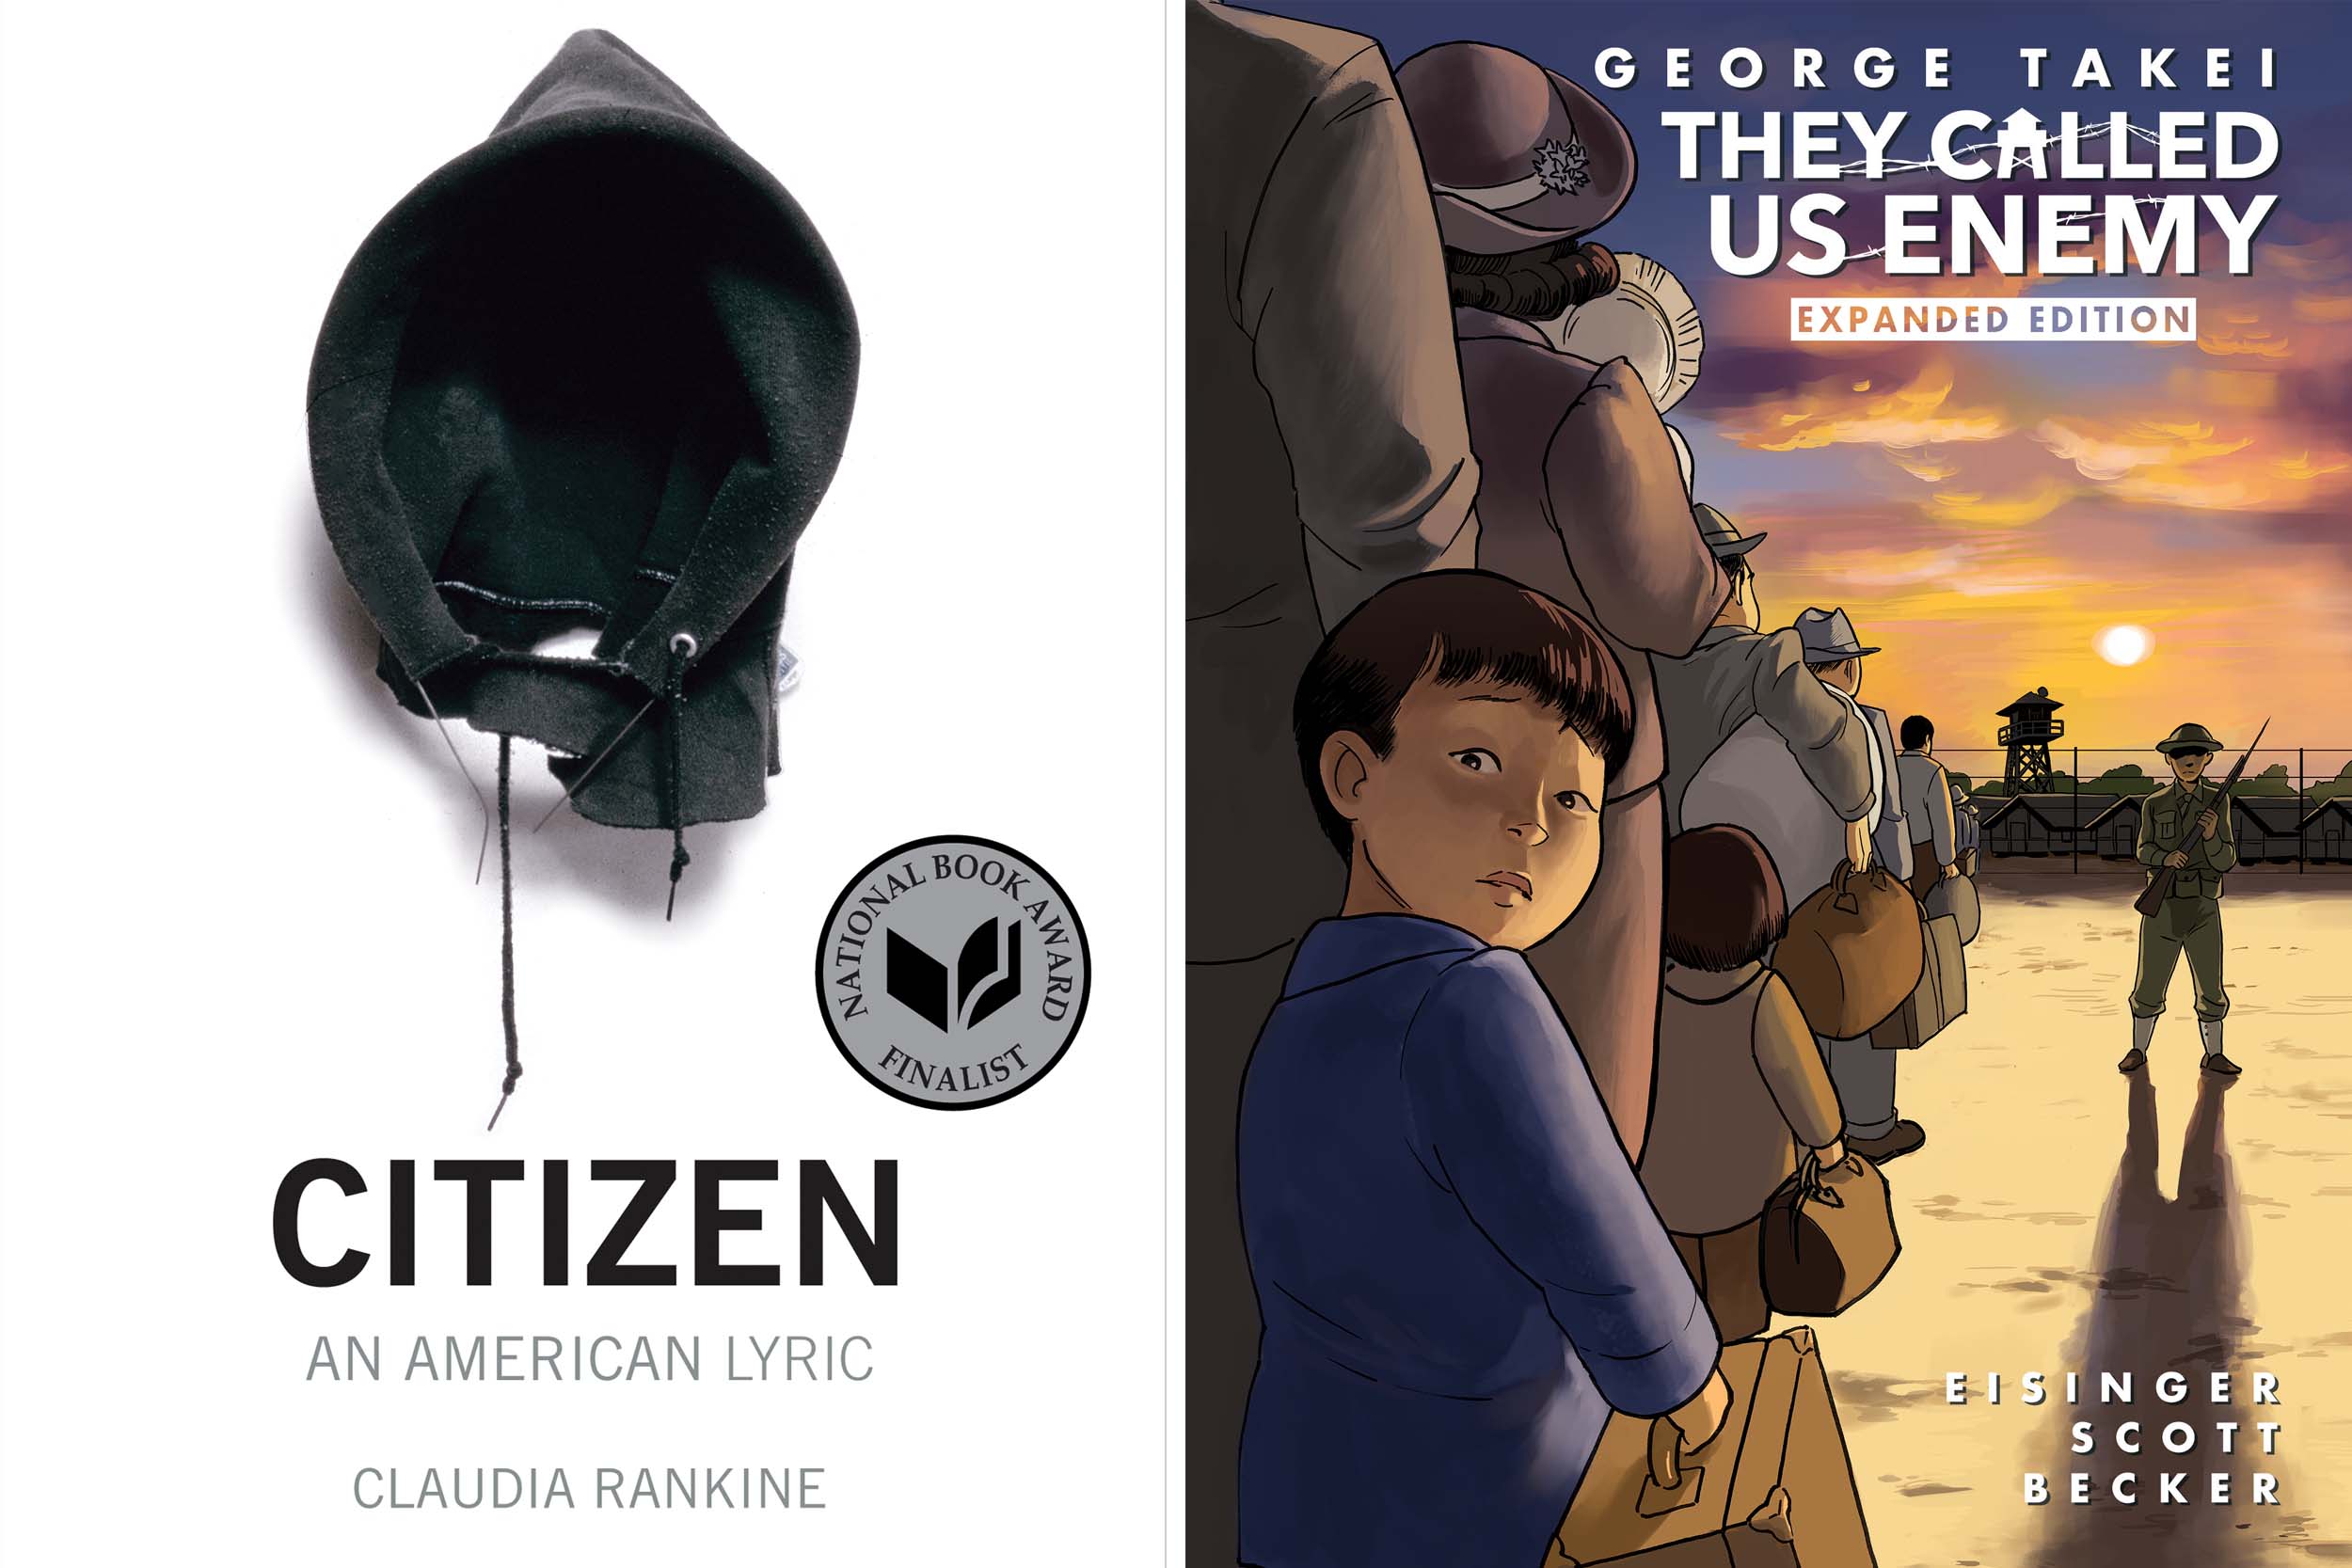 left: Hood with the words Citizen an american lyric claudia rankin, right: book cover with the words: George Takei They called us enemy expanded edition